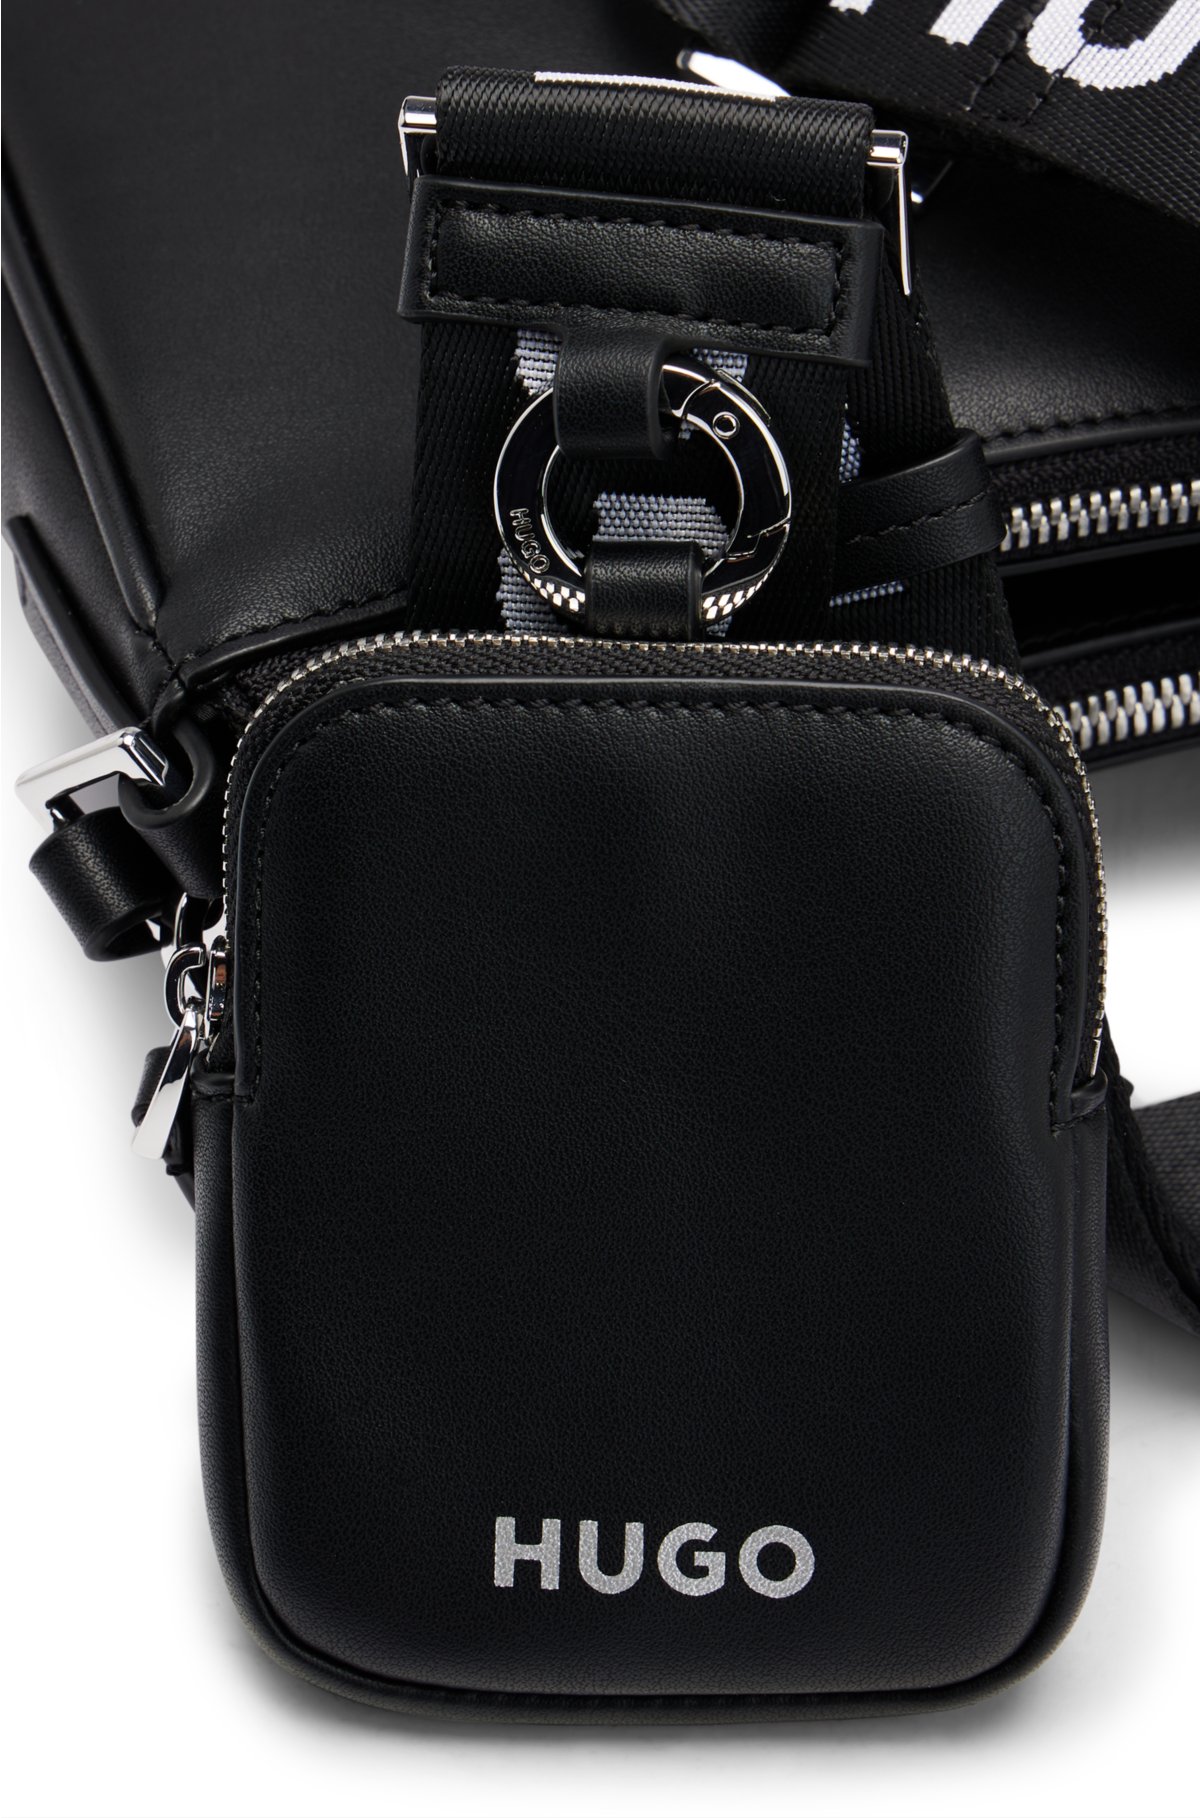 debossed branding and Crossbody pouches - detachable HUGO with bag